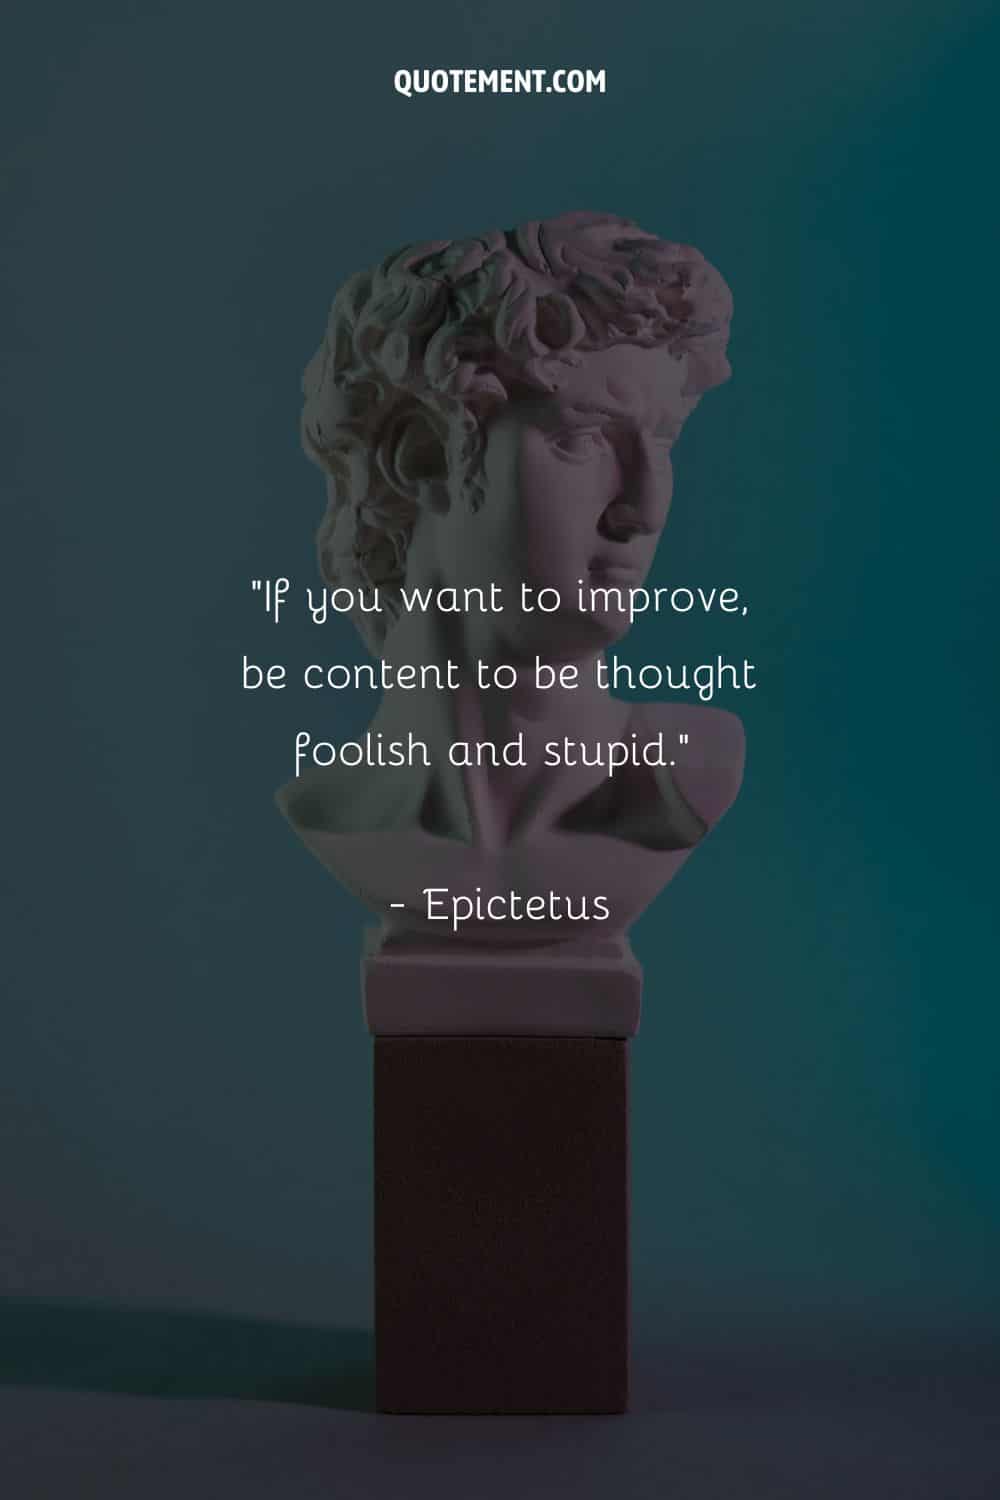 If you want to improve, be content to be thought foolish and stupid